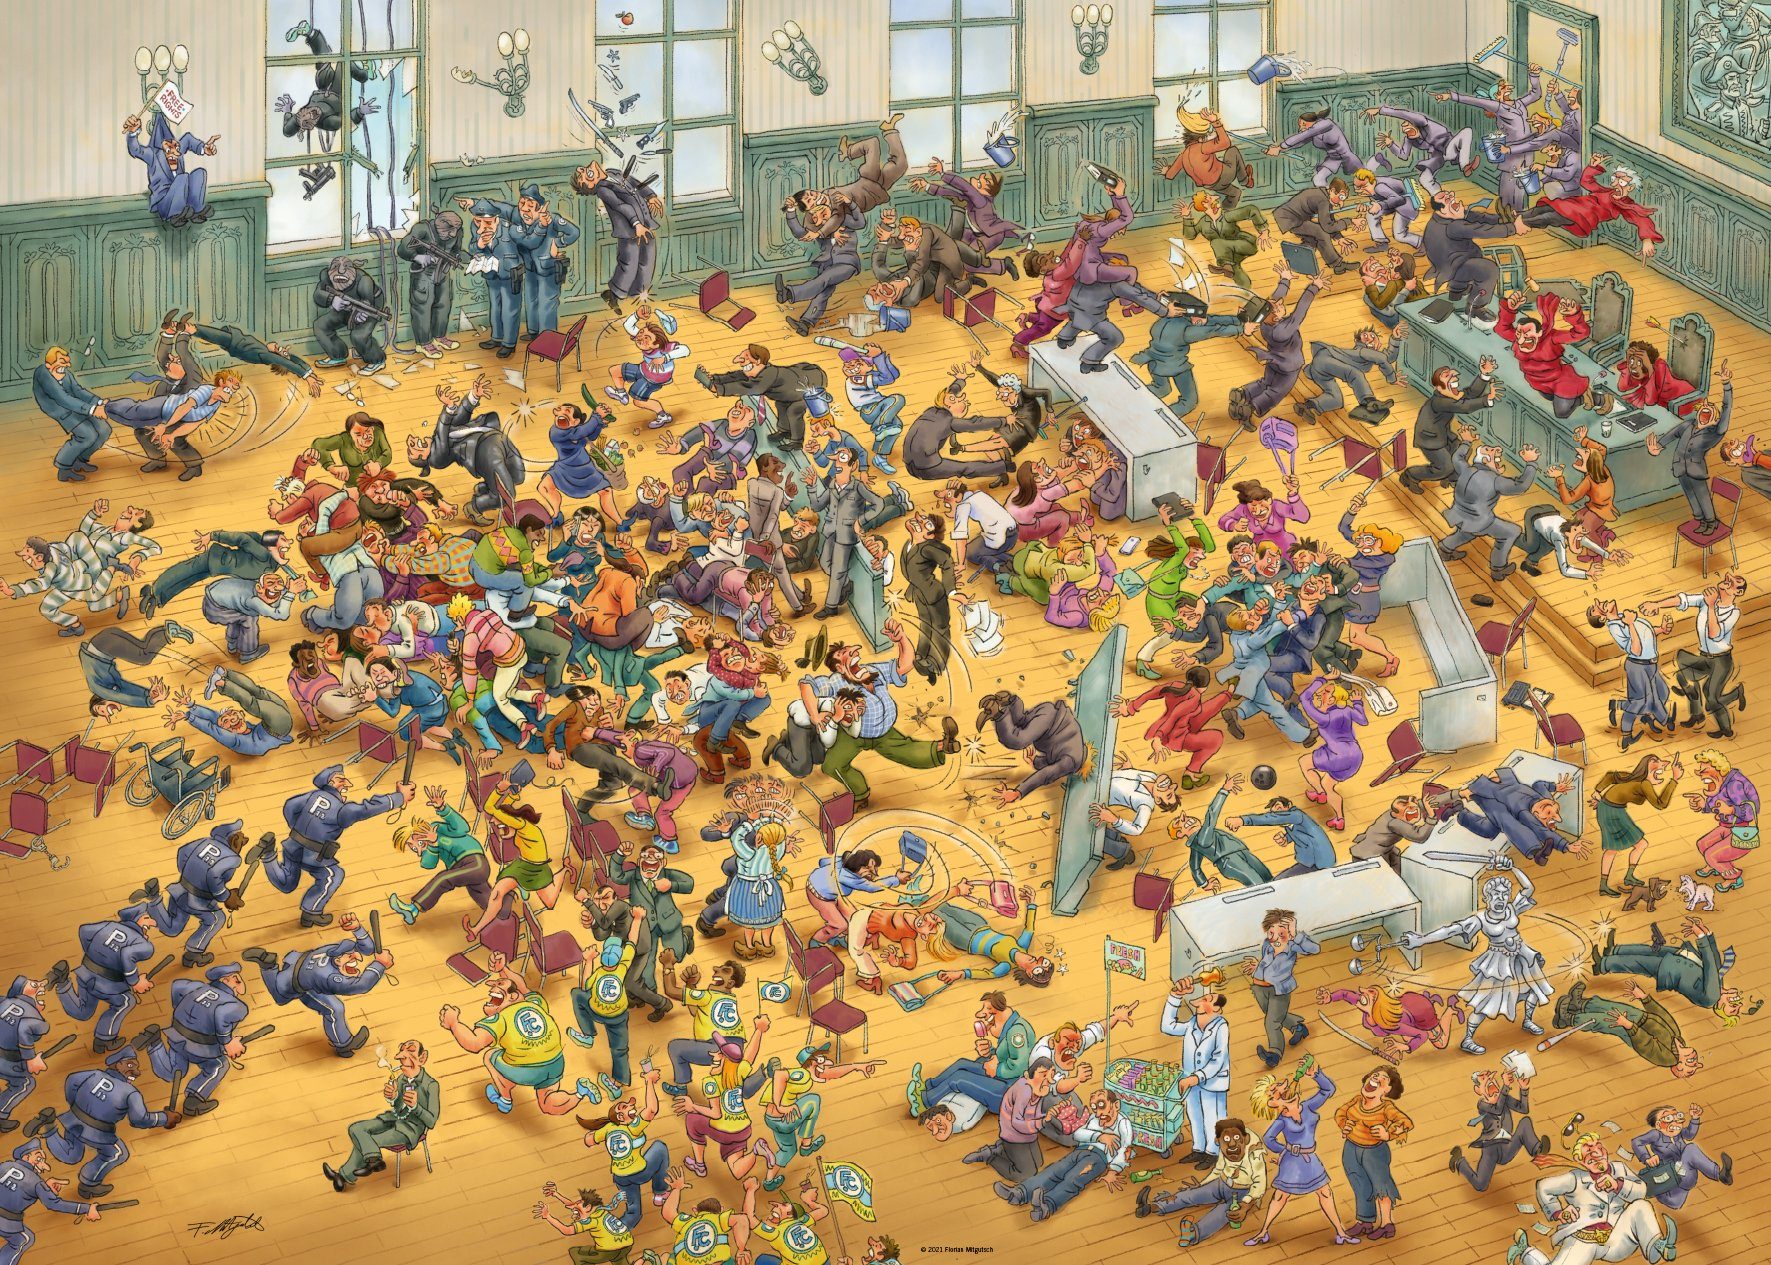 Made For Justice 1000 Europe Puzzle Puzzleteile, HEYE Mitgutsch, in All!